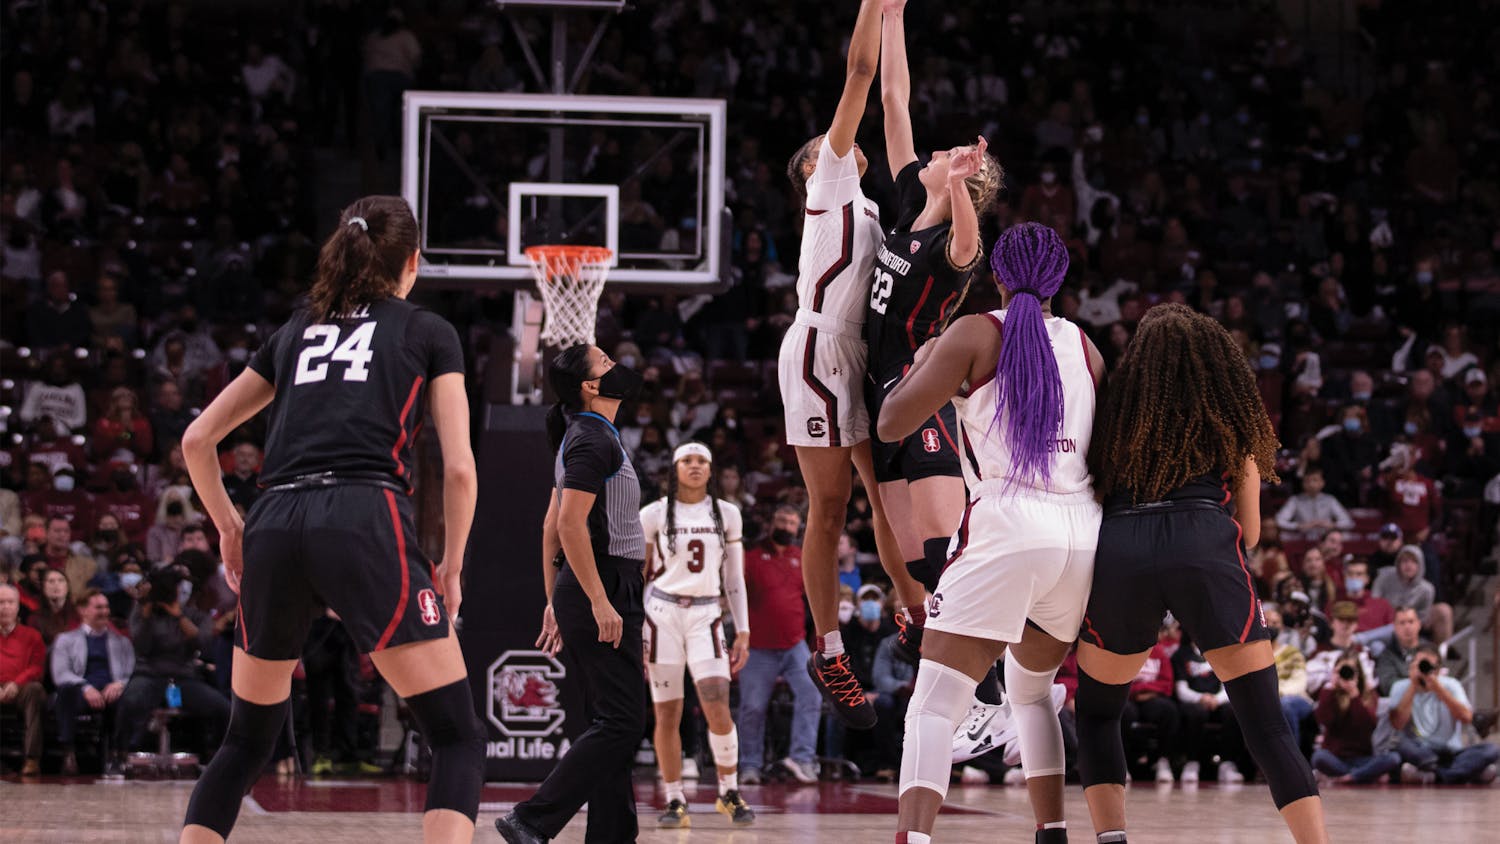 Senior forward Victaria Saxton works to gain possession of the ball during the tip-off on Dec. 21, 2021. The South Carolina women's basketball team defeated No. 2 Stanford 65-61.